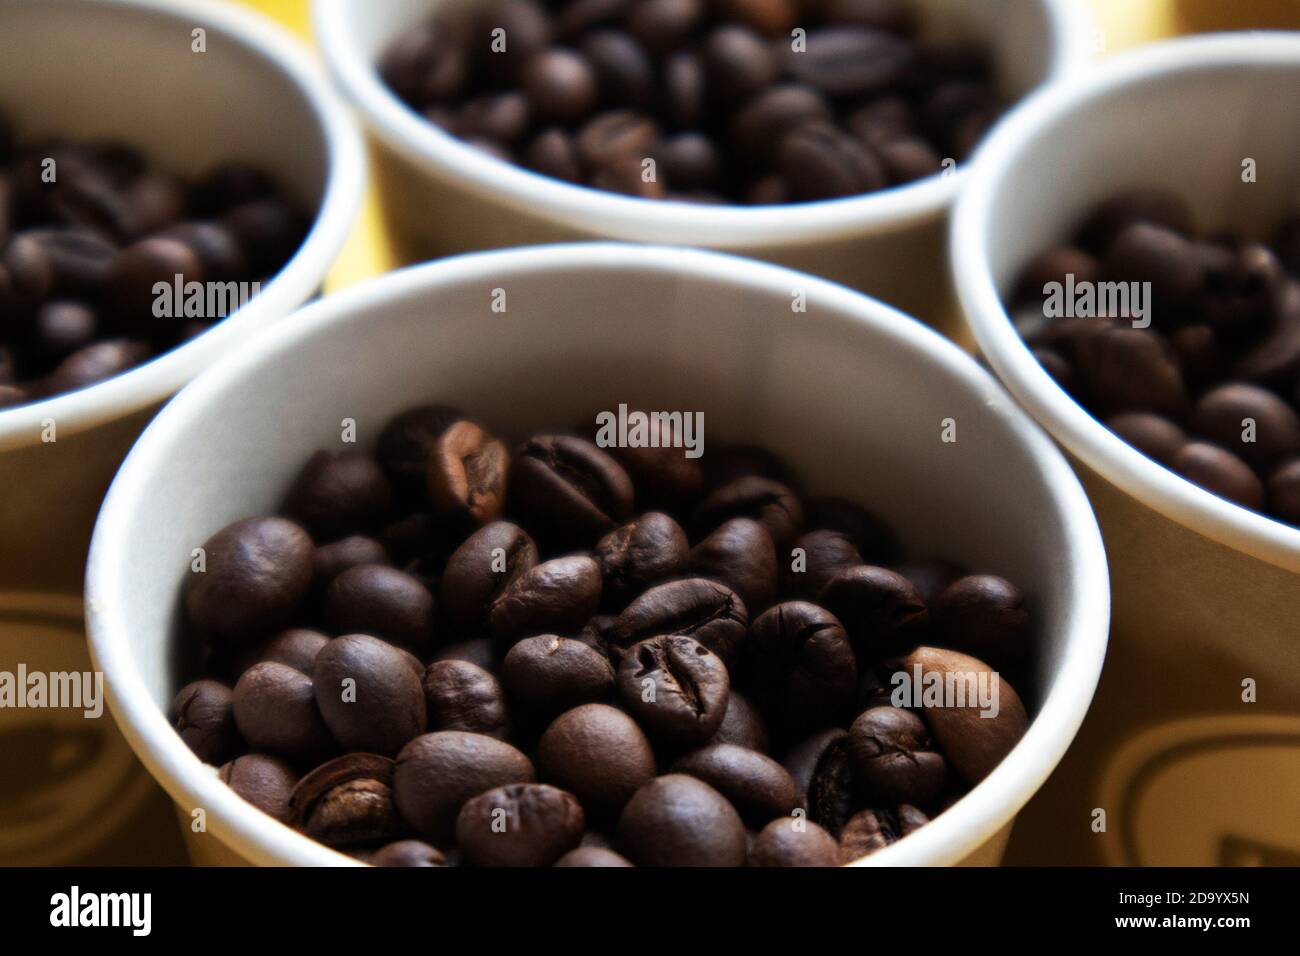 The tops of few cardboard cups full of roasted coffee beans Stock Photo